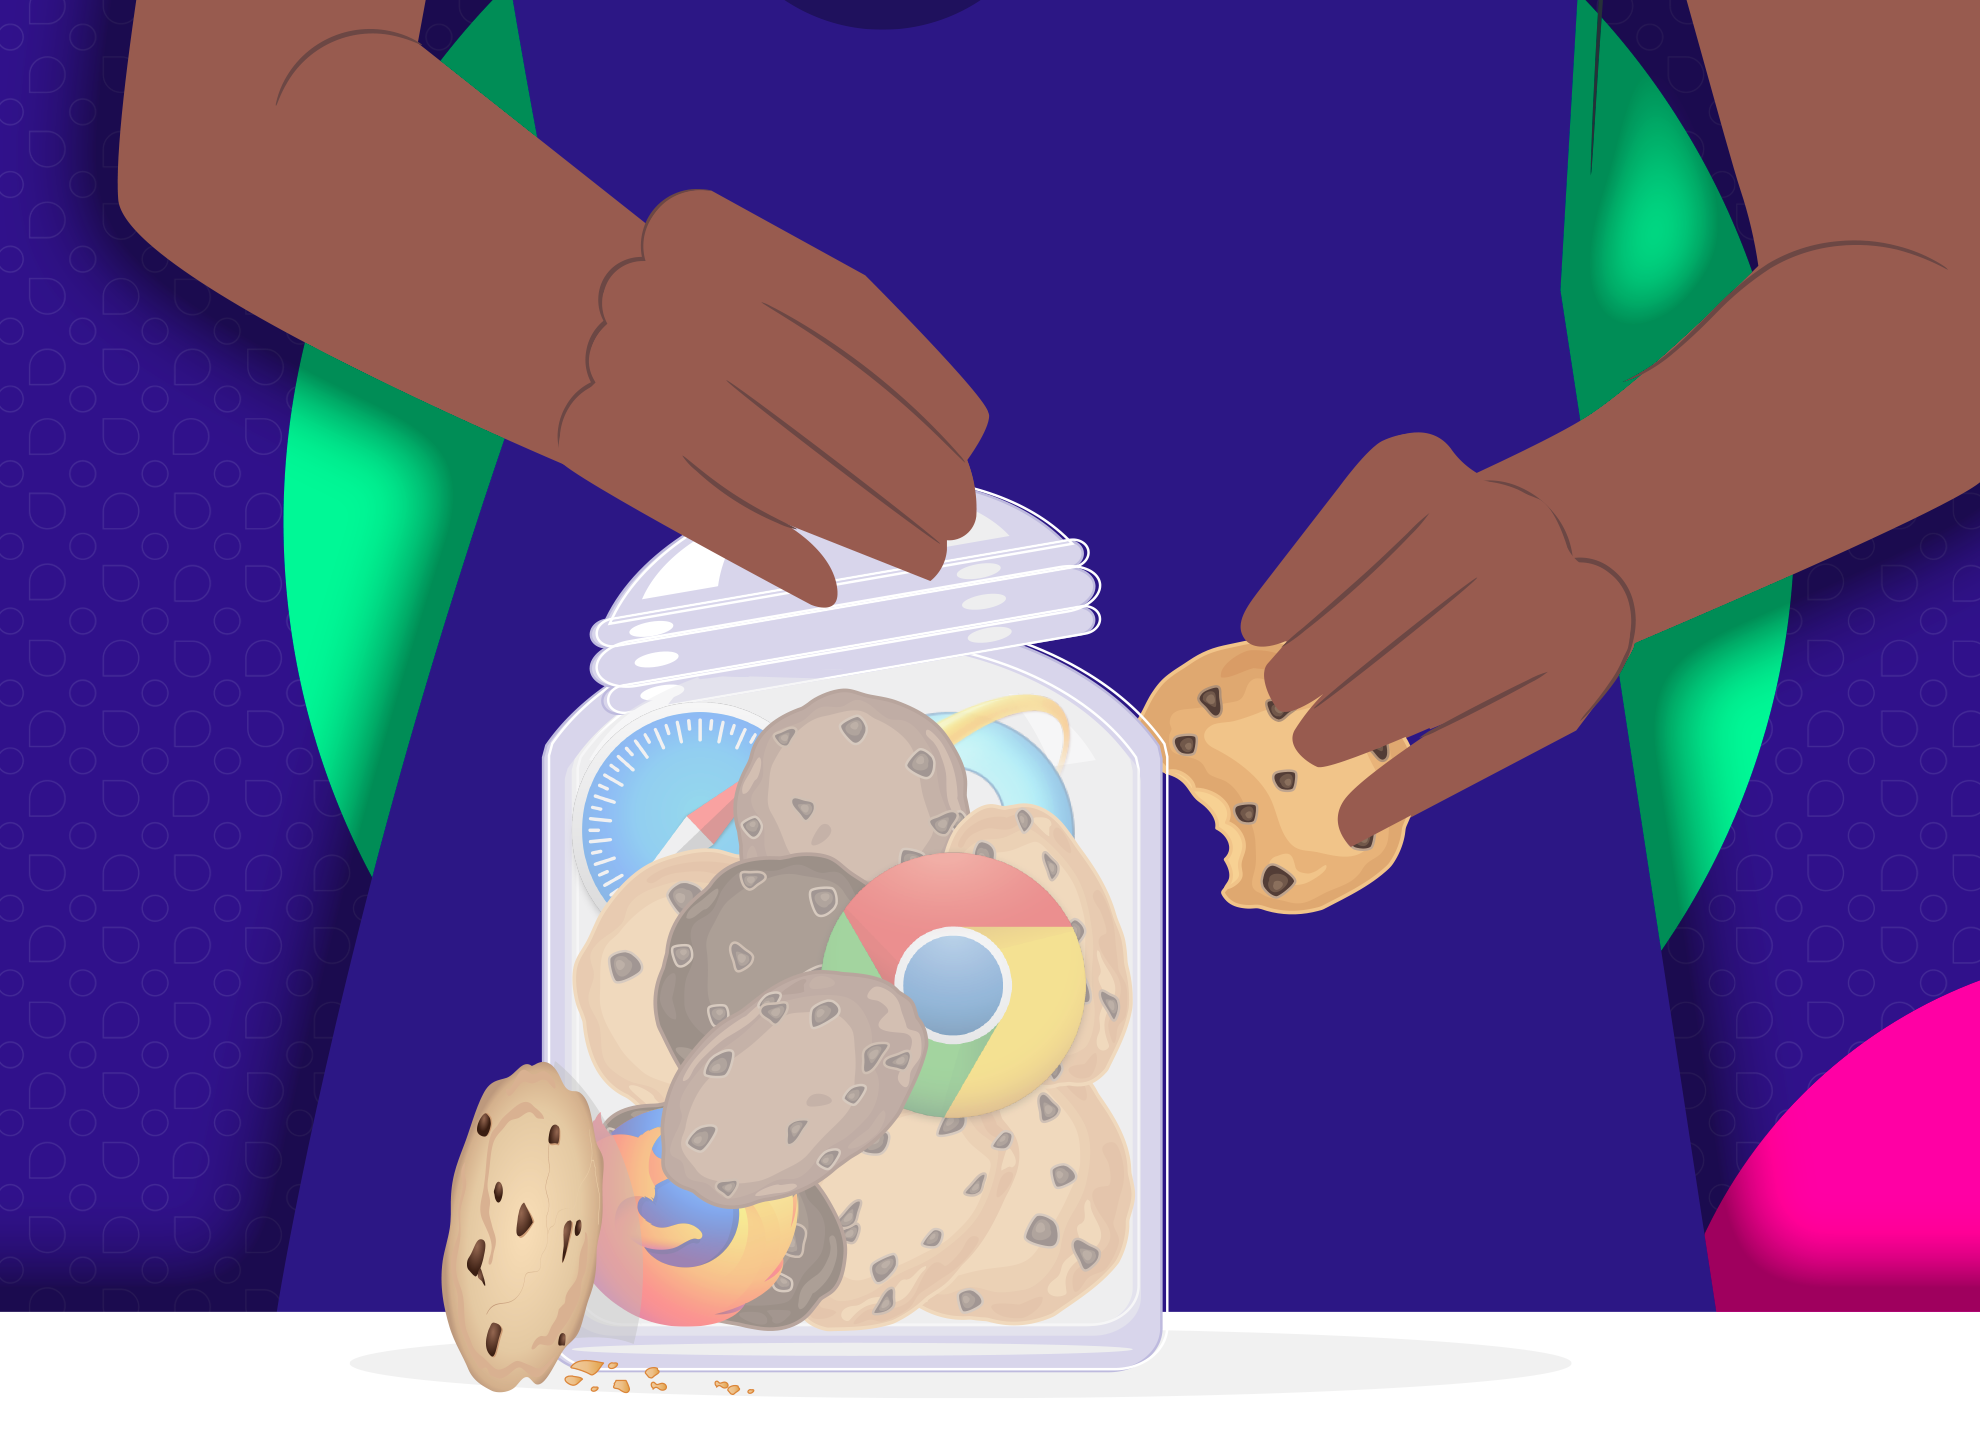 Is losing third-party cookies the of world?